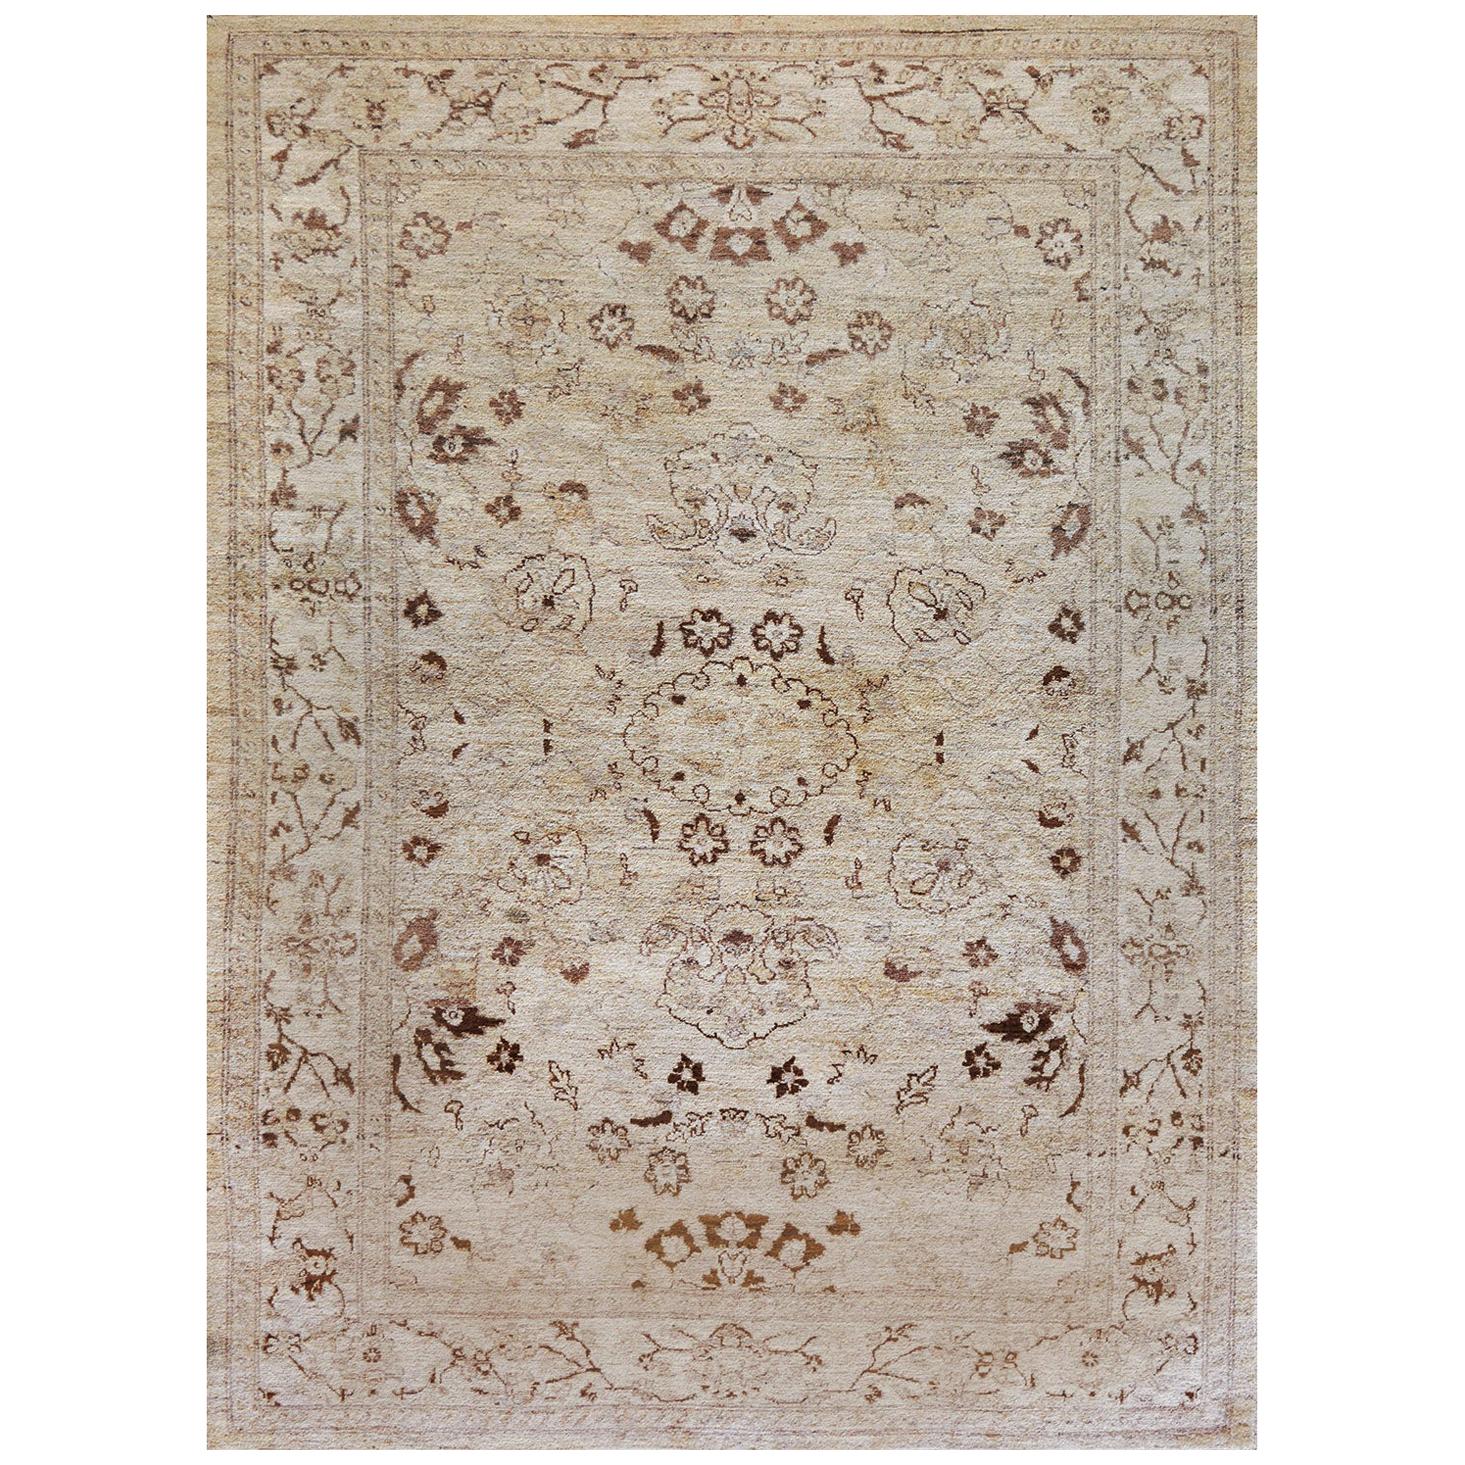 Brand New Handwoven 100% Wool Agra-inspired Rug For Sale